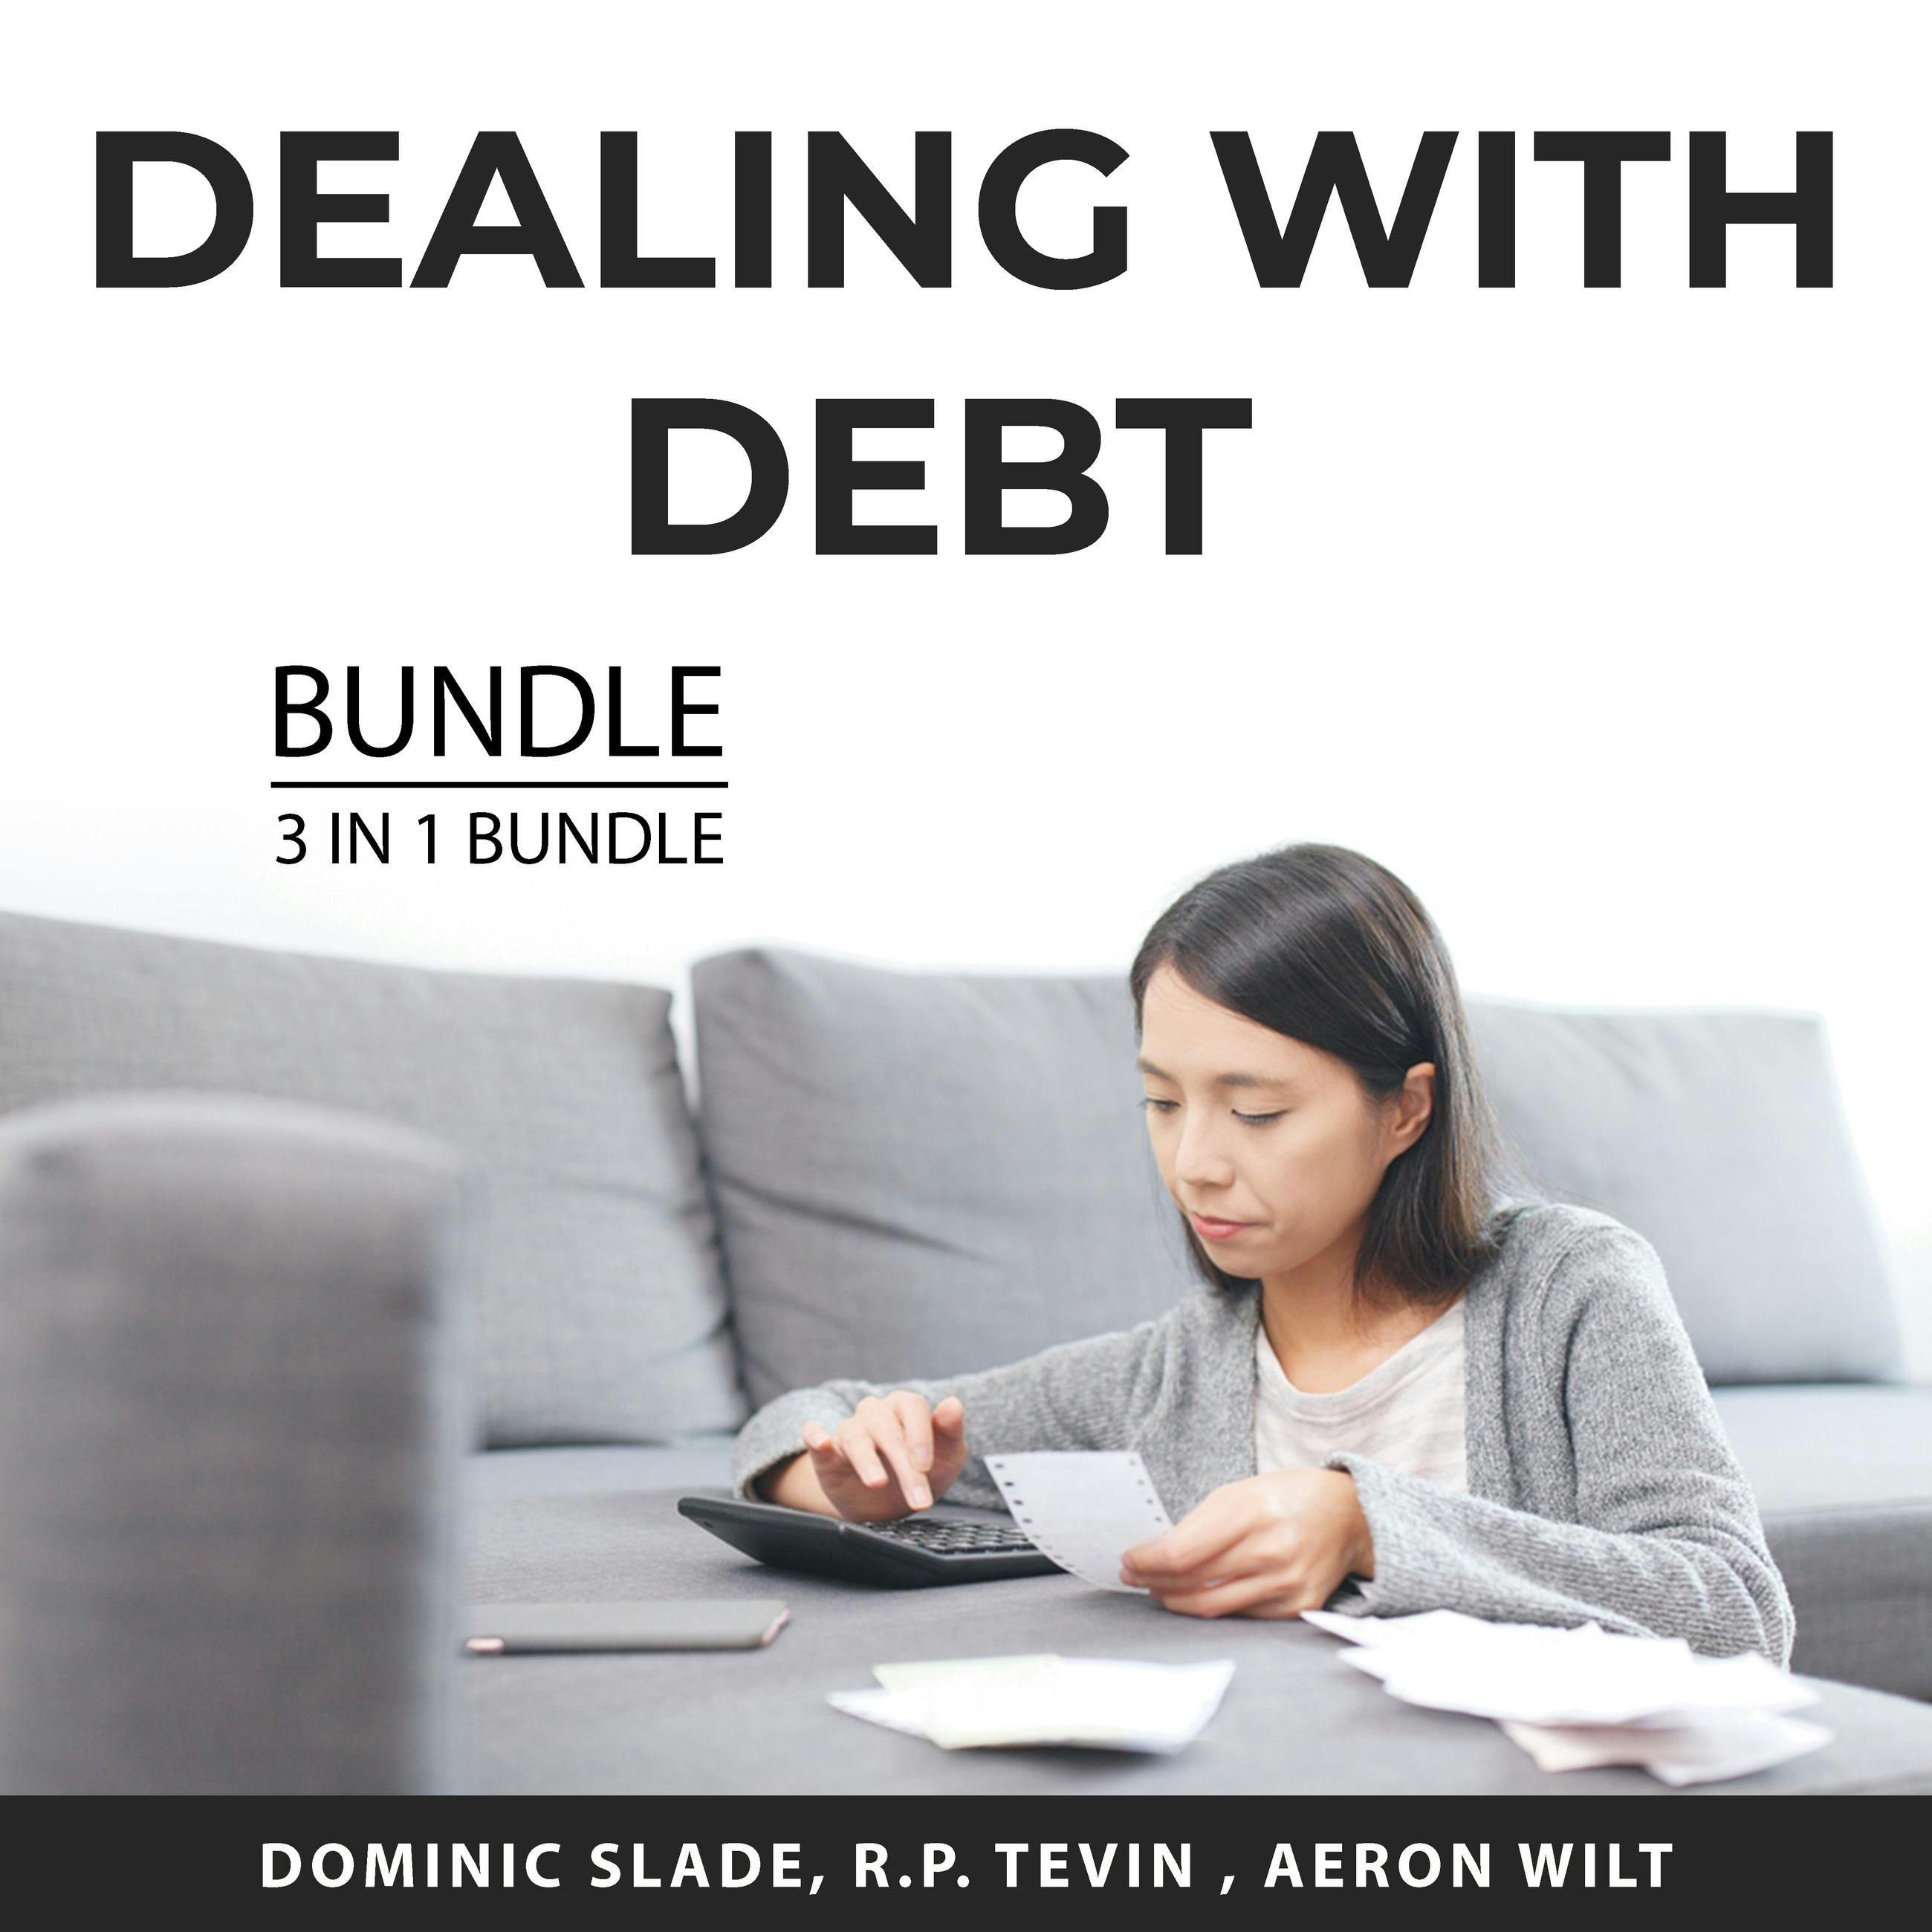 Dealing With Debt Bundle, 3 in 1 Bundle: How to Be Debt Free, Clear Your Debt, and Life After Bankruptcy - Dominic Slade, R.P. Tevin, Aeron Wilt